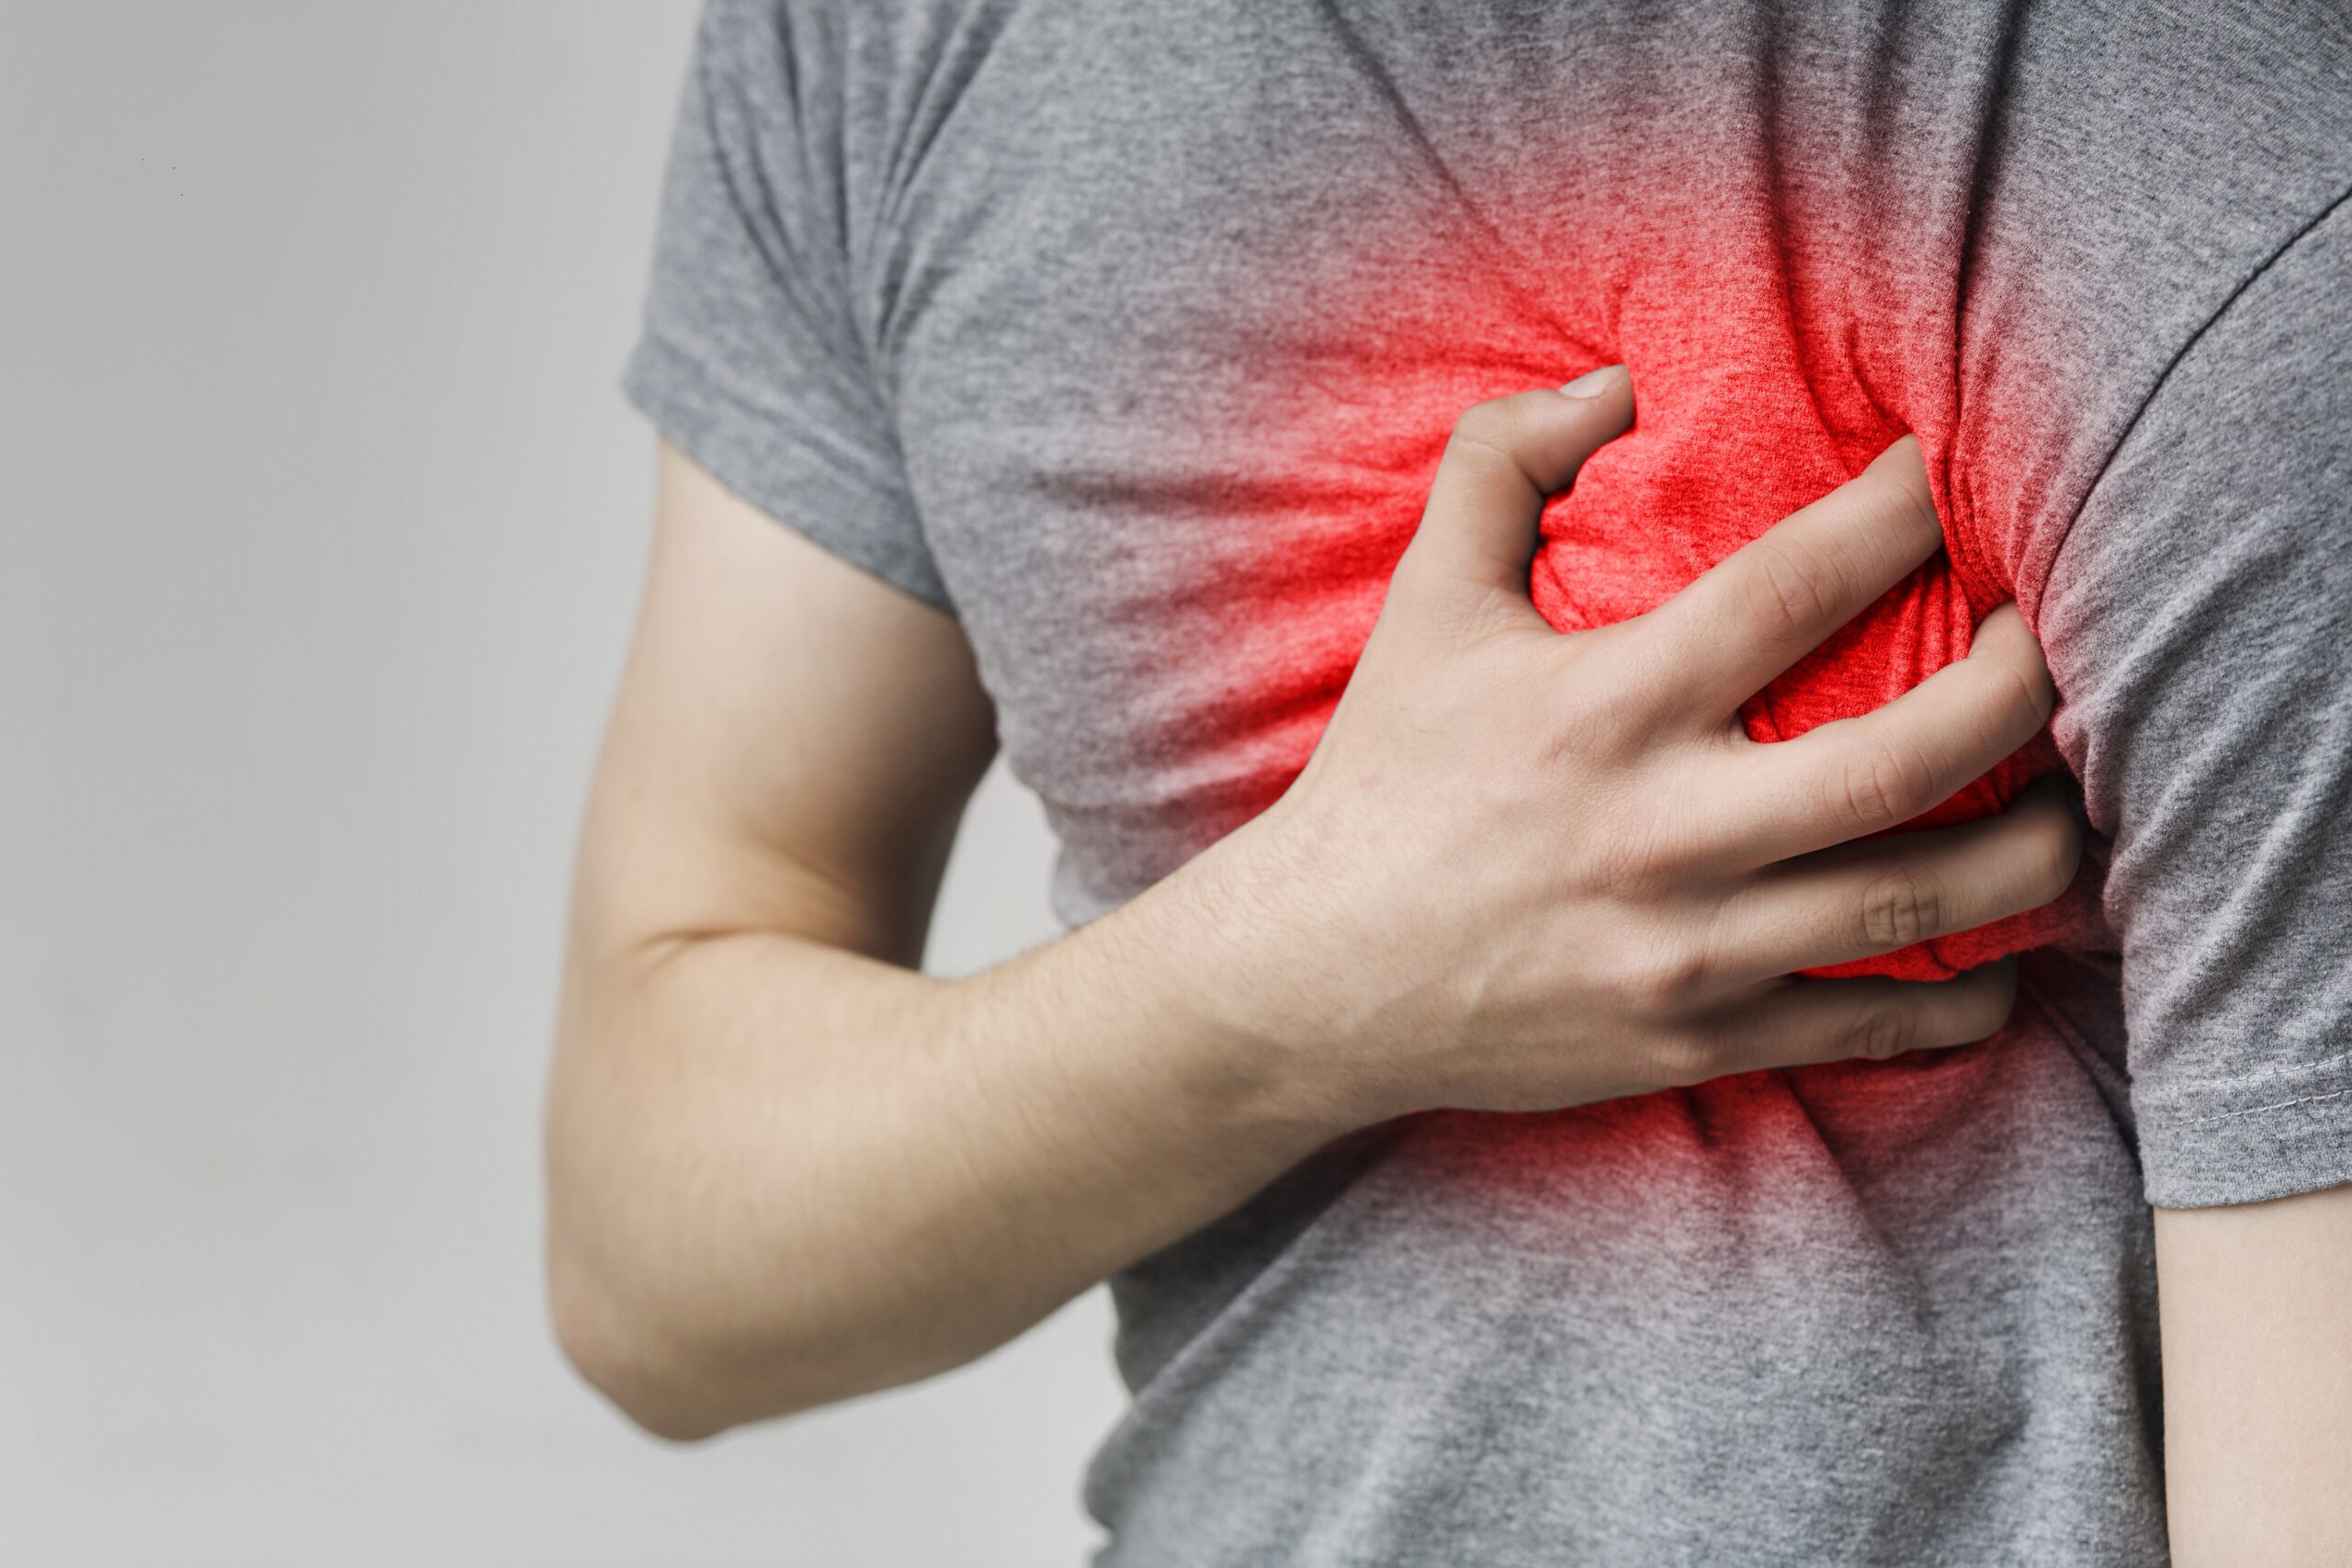 Heart pain: The cause of chest pain often remains unclear